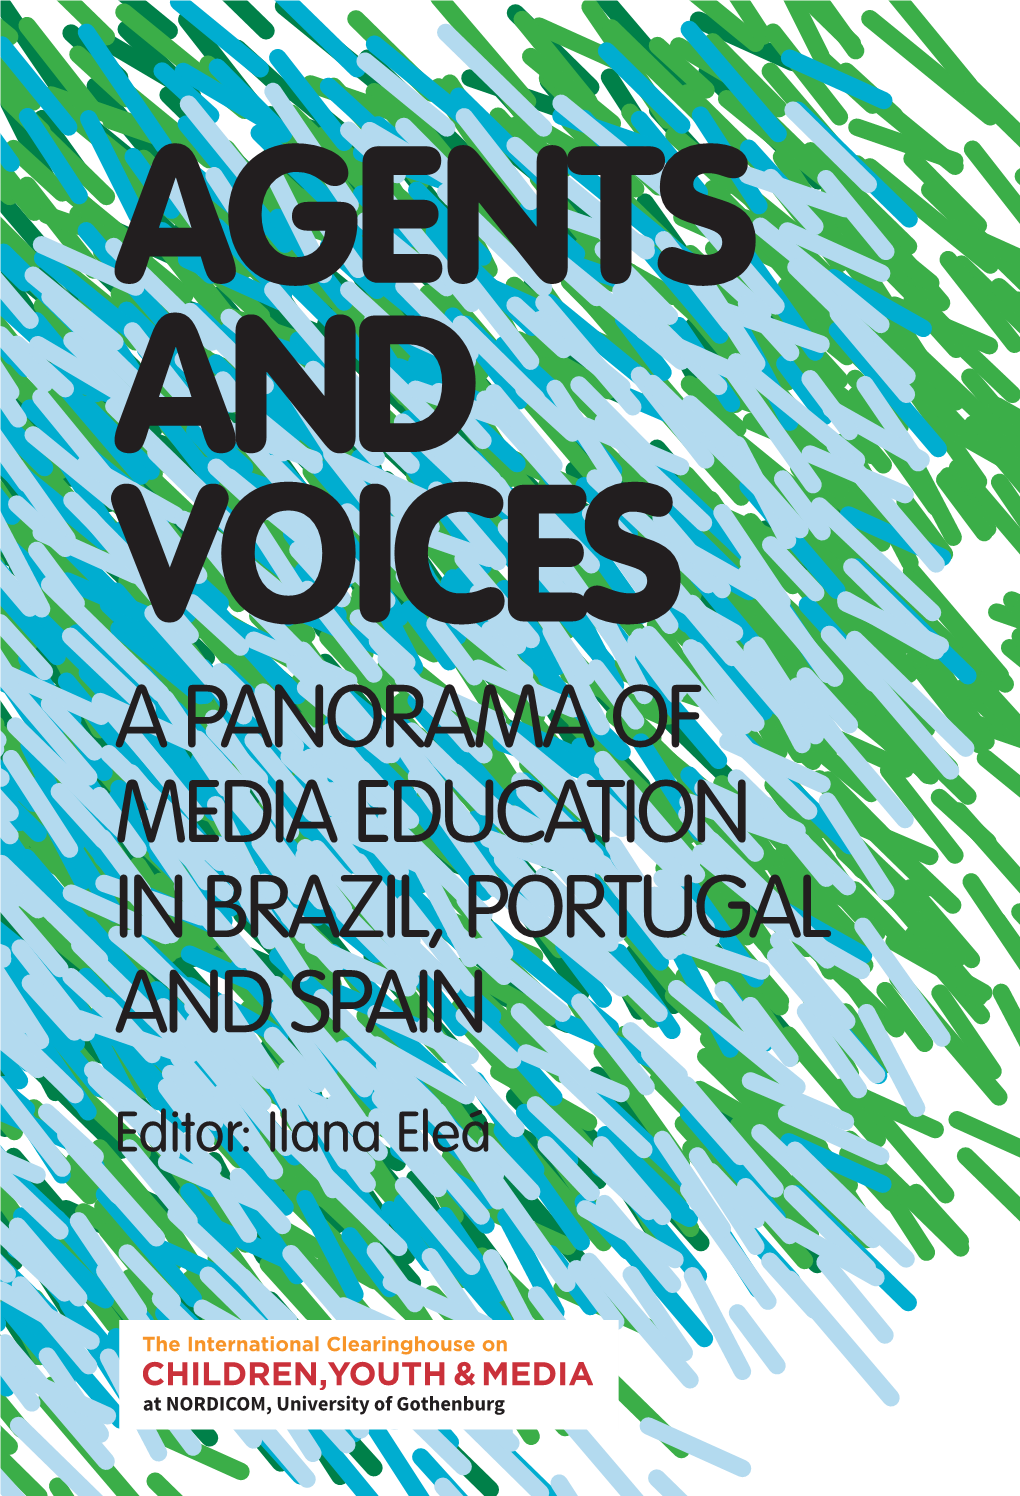 A Panorama of Media Education in Brazil, Portugal and Spain